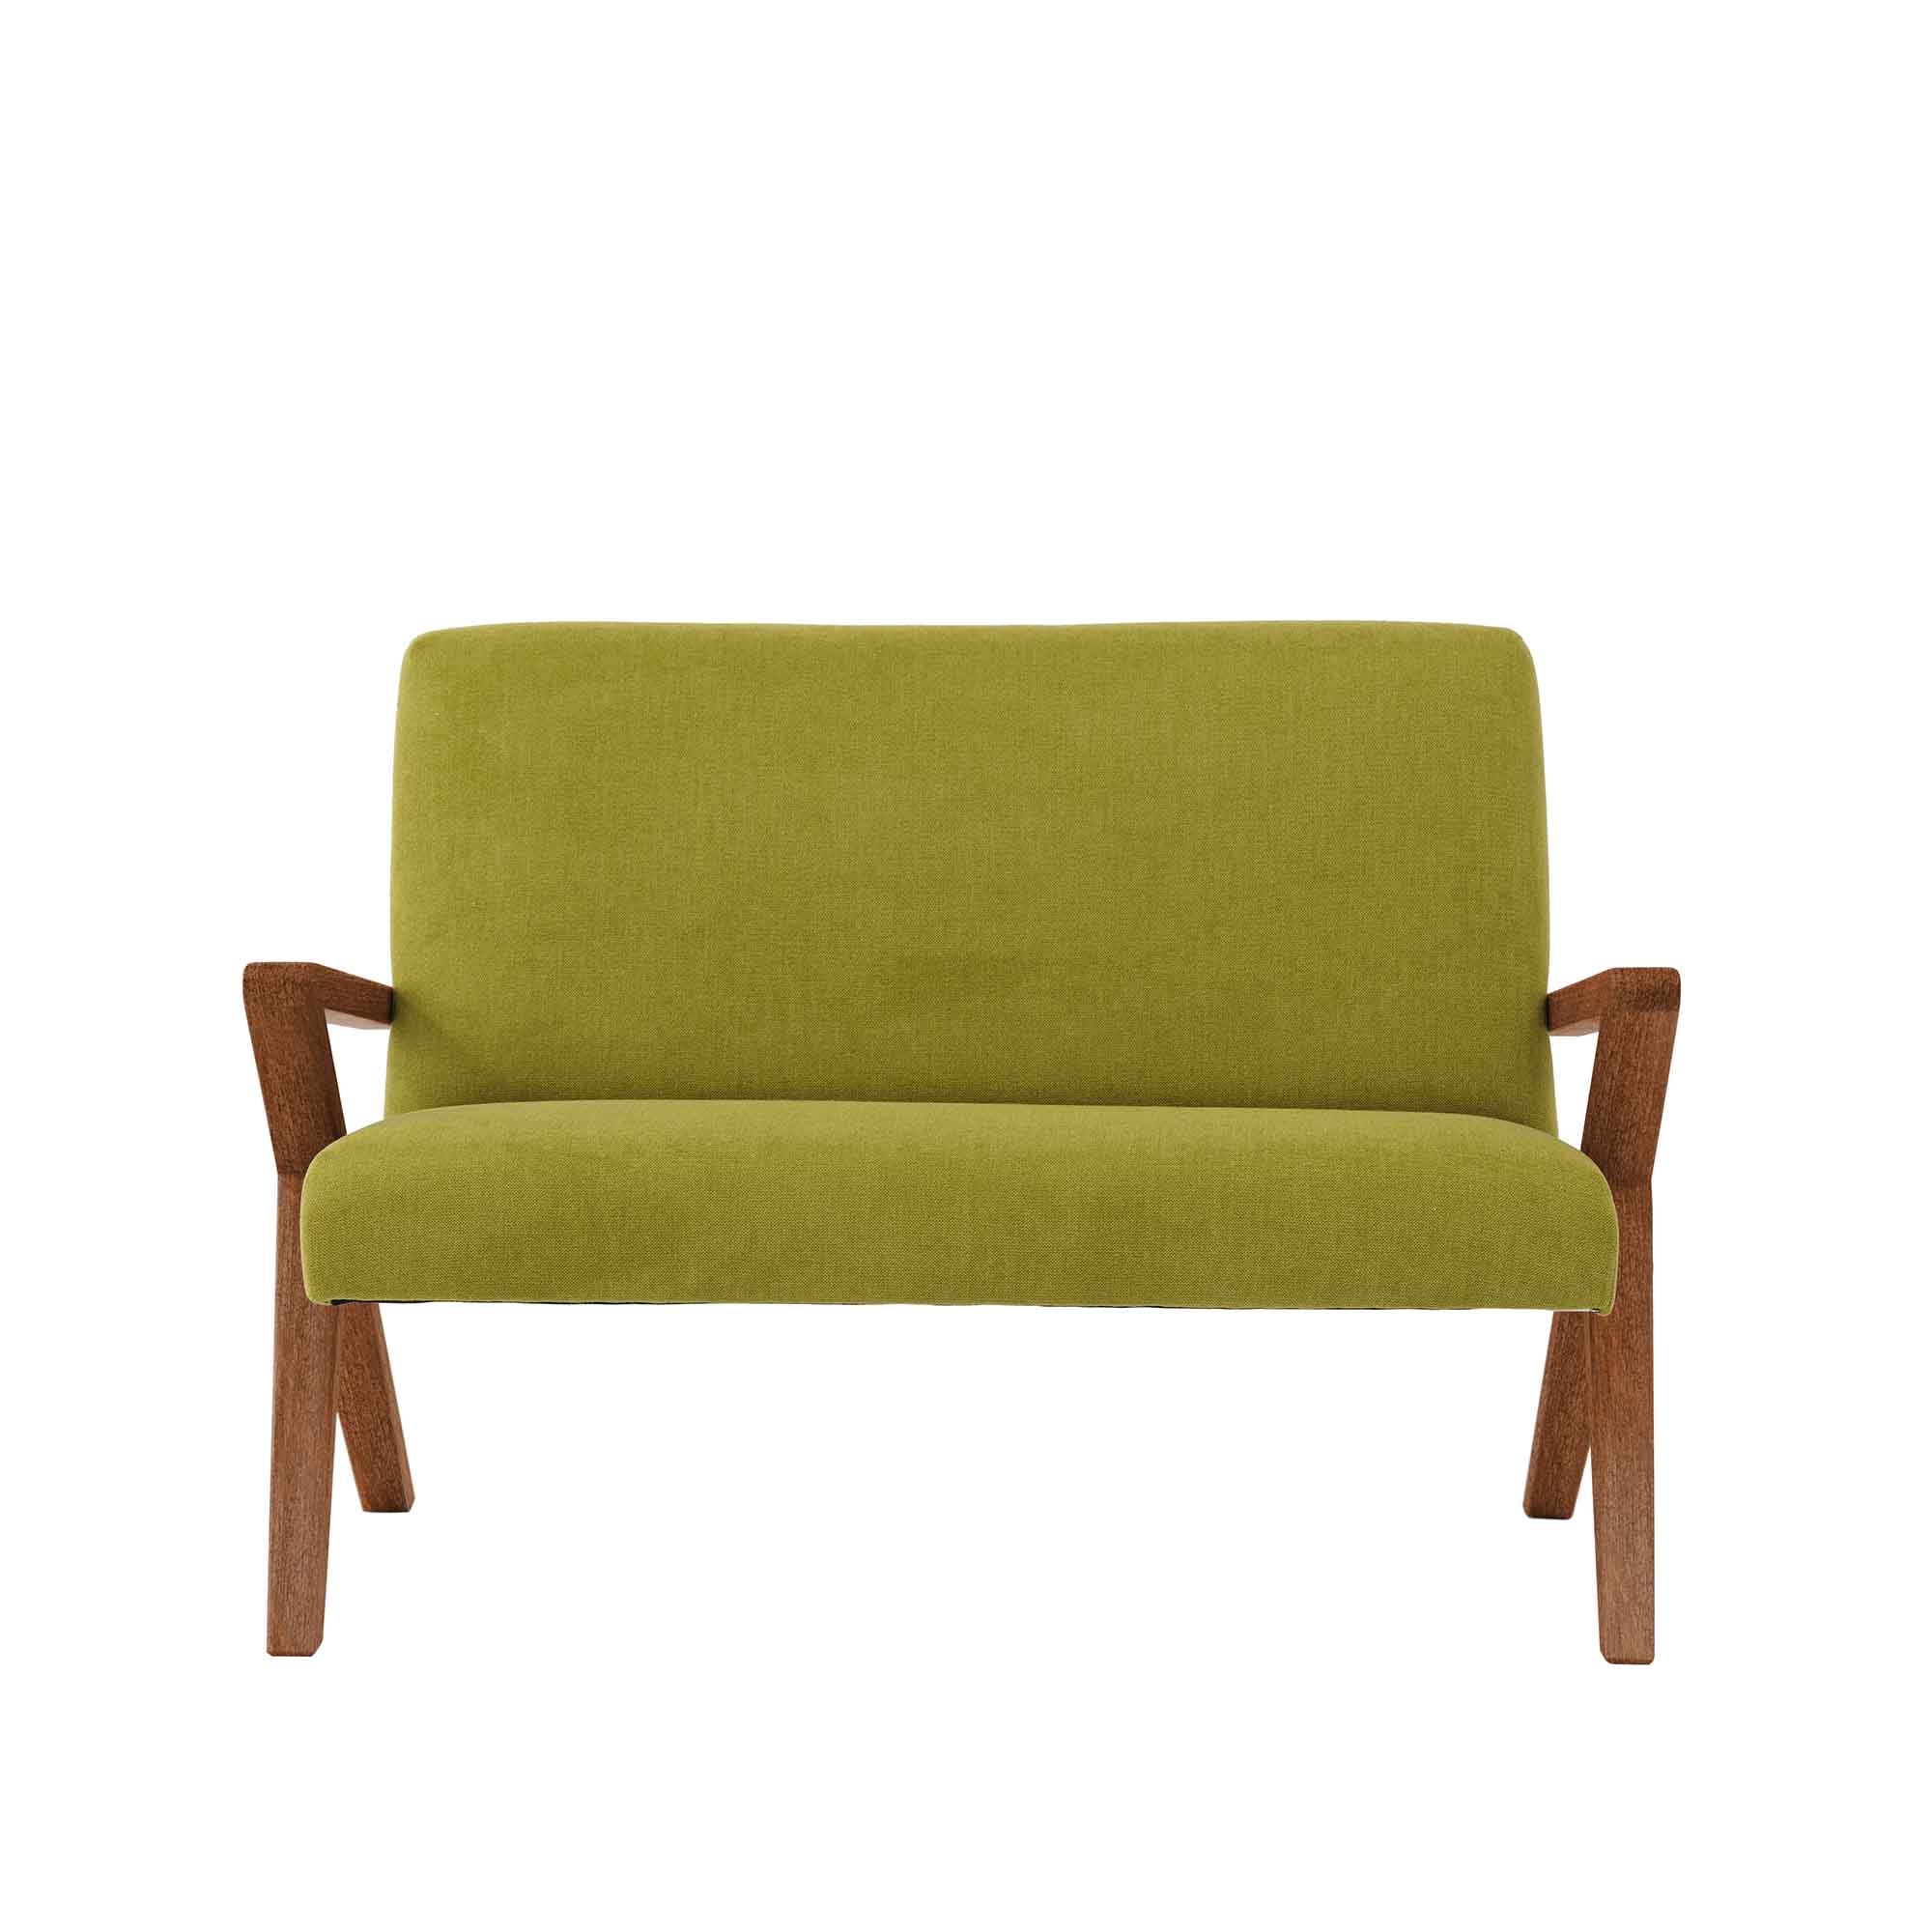  2 Seater Sofa, Beech Wood Frame, Walnut Colour green upholstery, front view